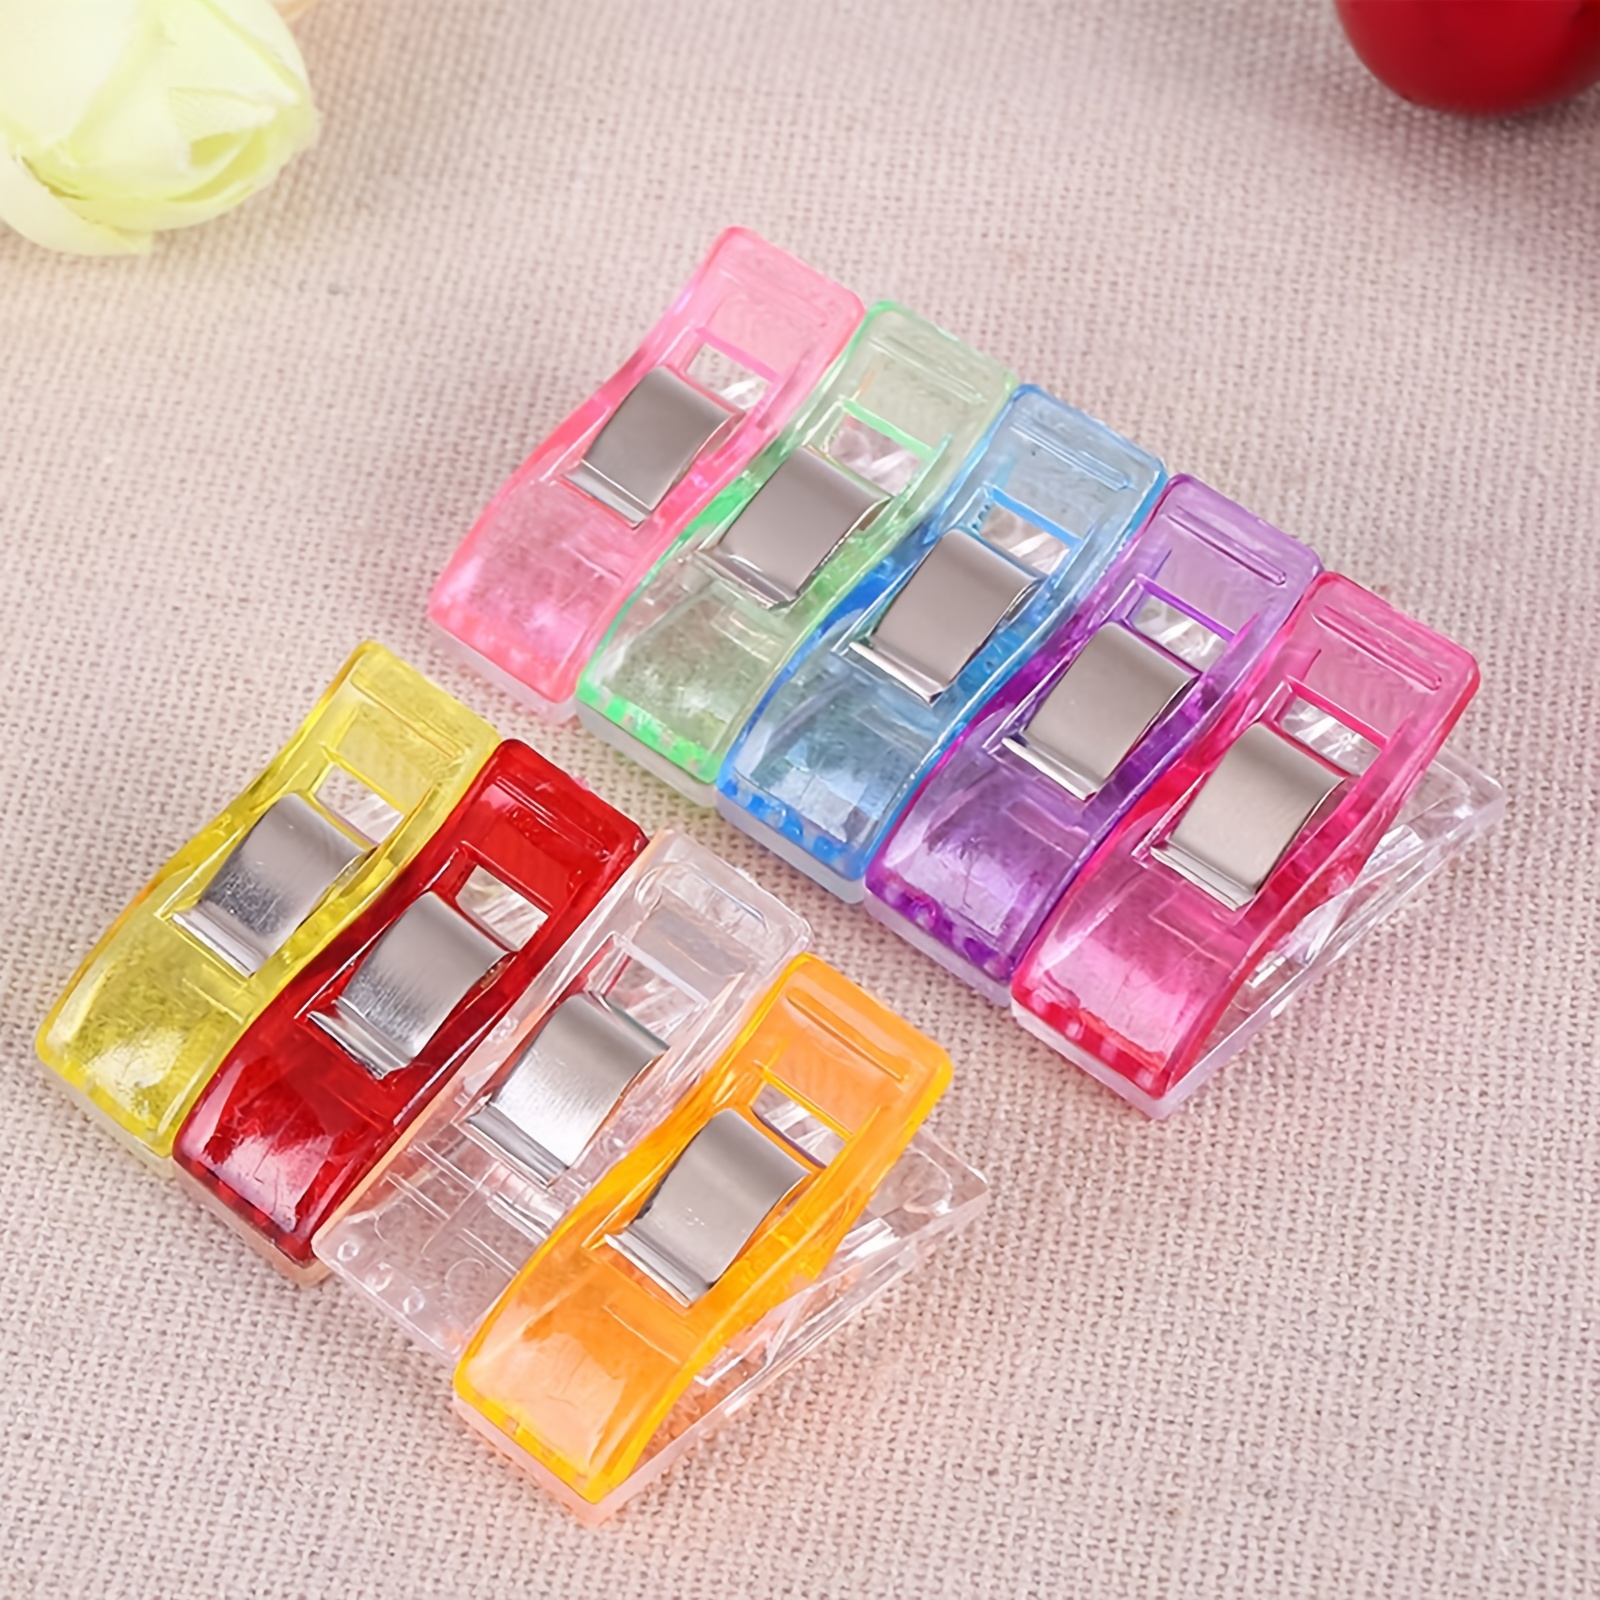 Performore Multi-Color Premium Plastic Clips, Multipurpose Sewing Clips for Fabric, Quilt Binding Clips, Crafting Tool Supplies 100 Pcs with Tin Box